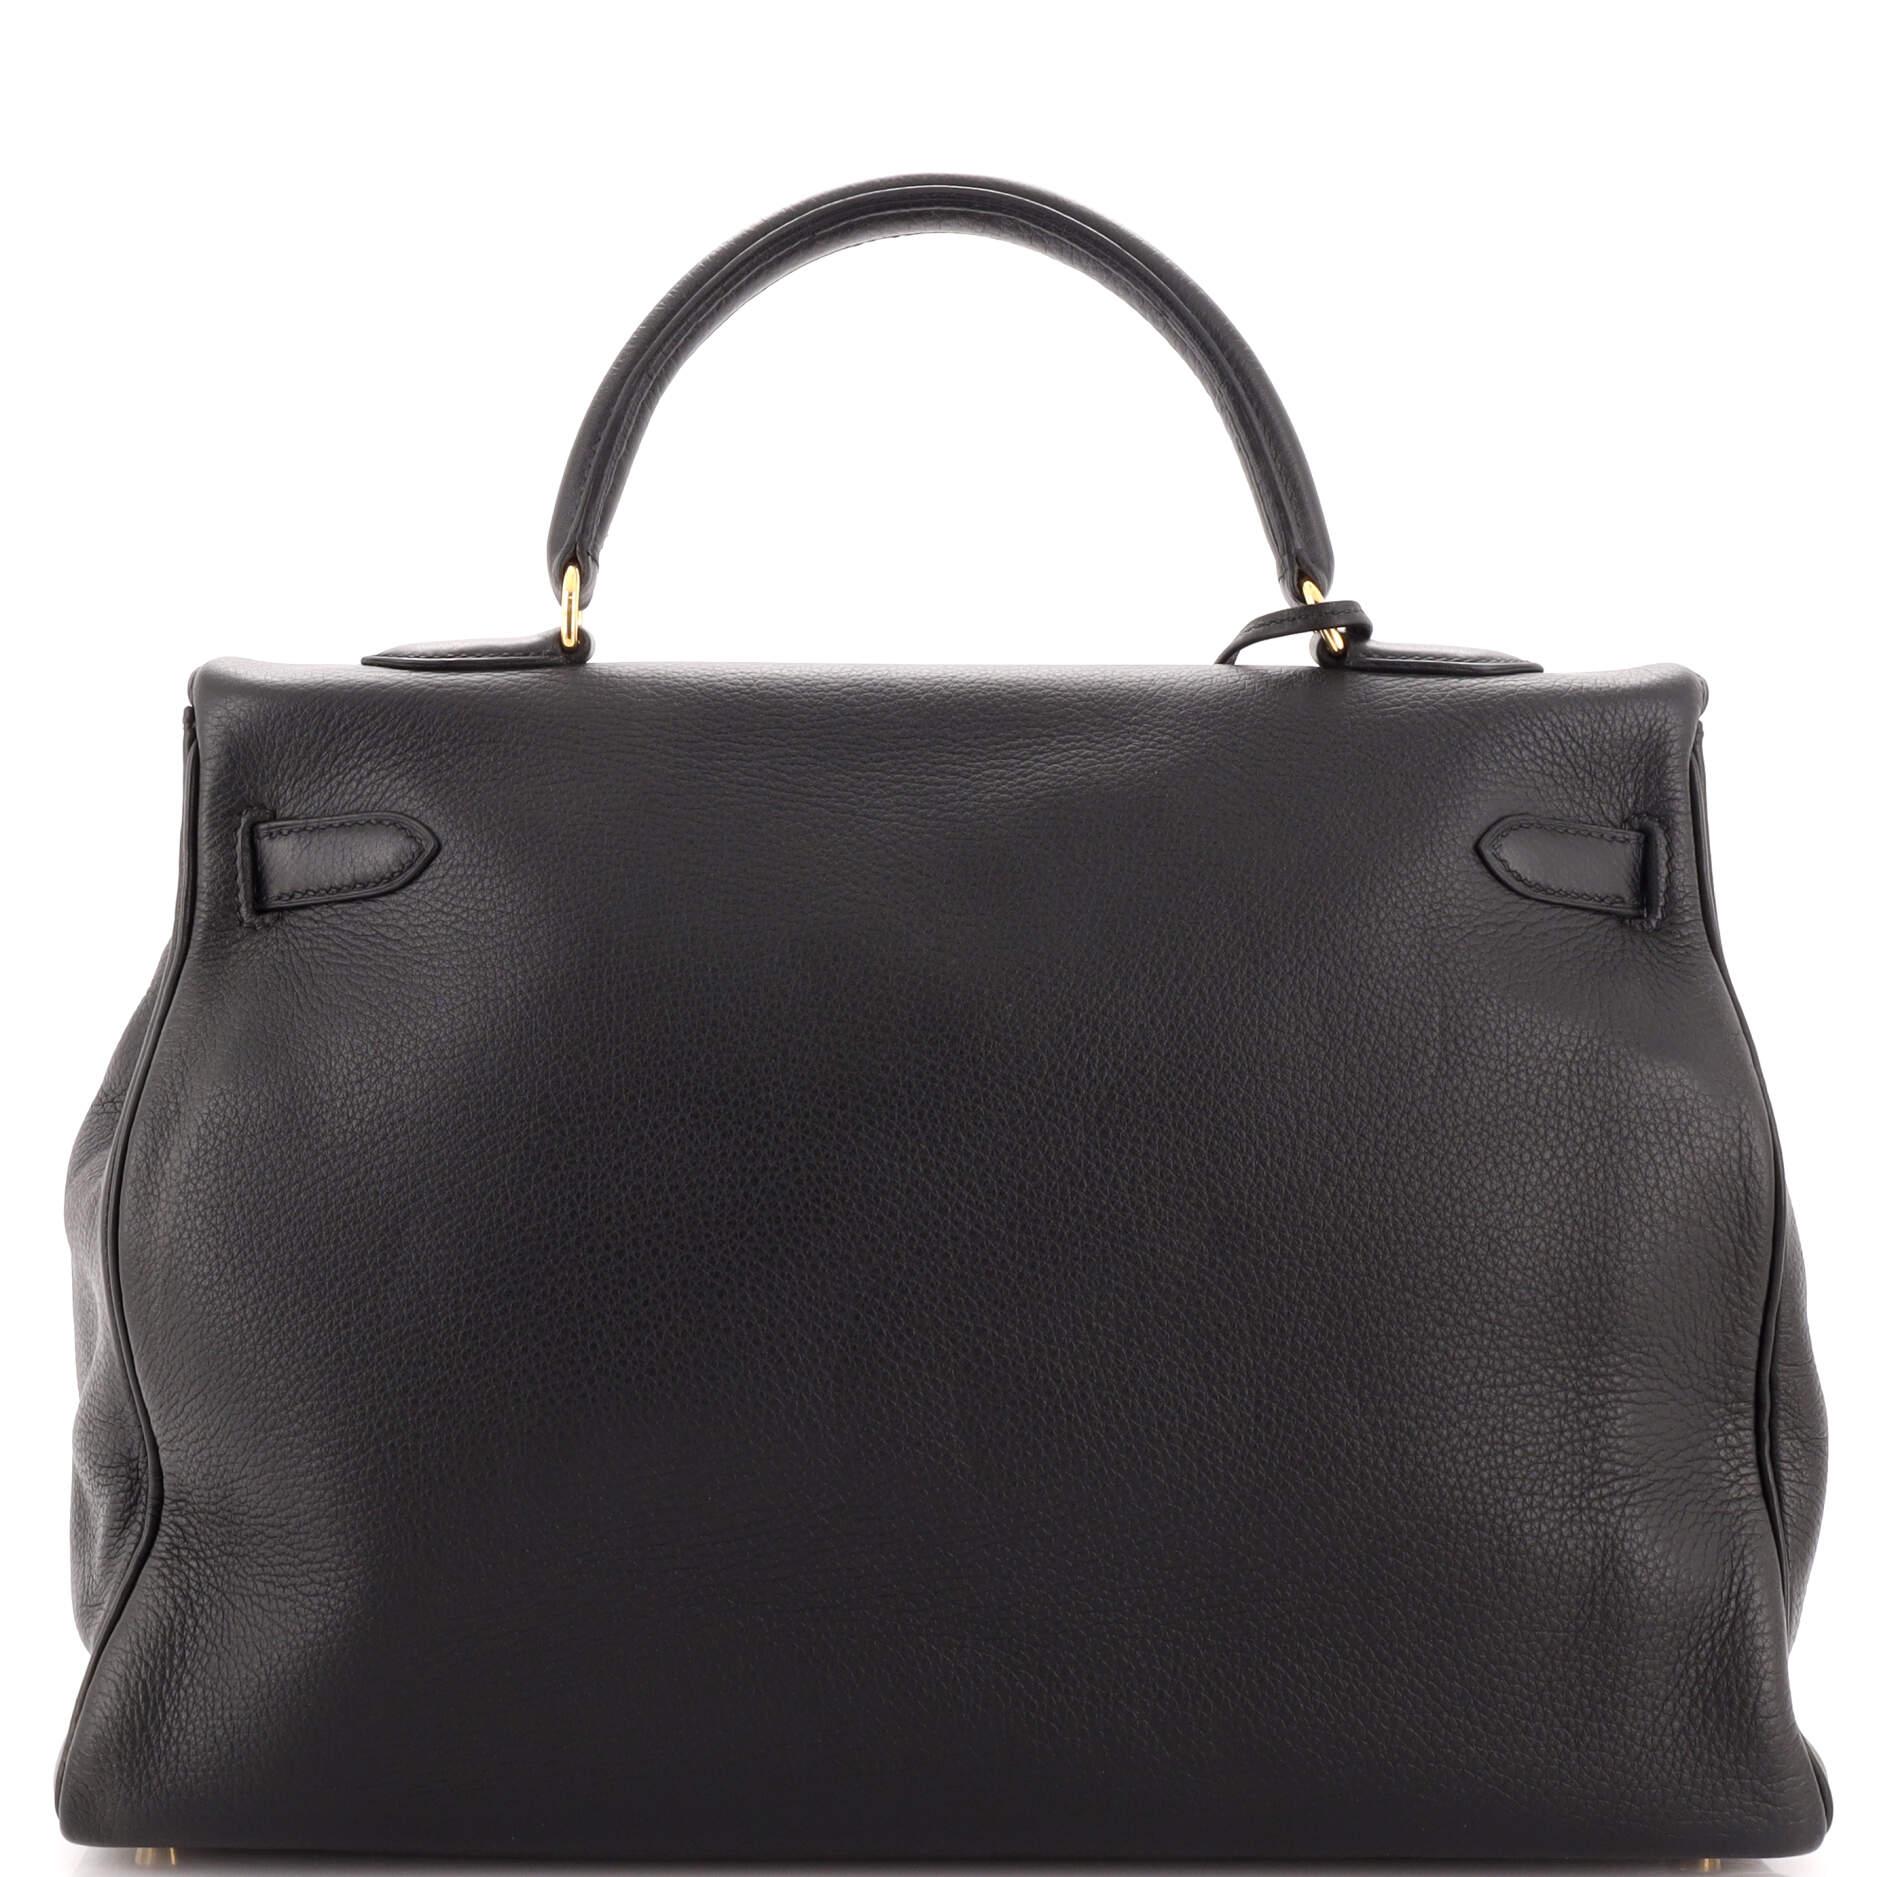 Hermes Kelly Handbag Noir Clemence with Gold Hardware 35 In Good Condition For Sale In NY, NY